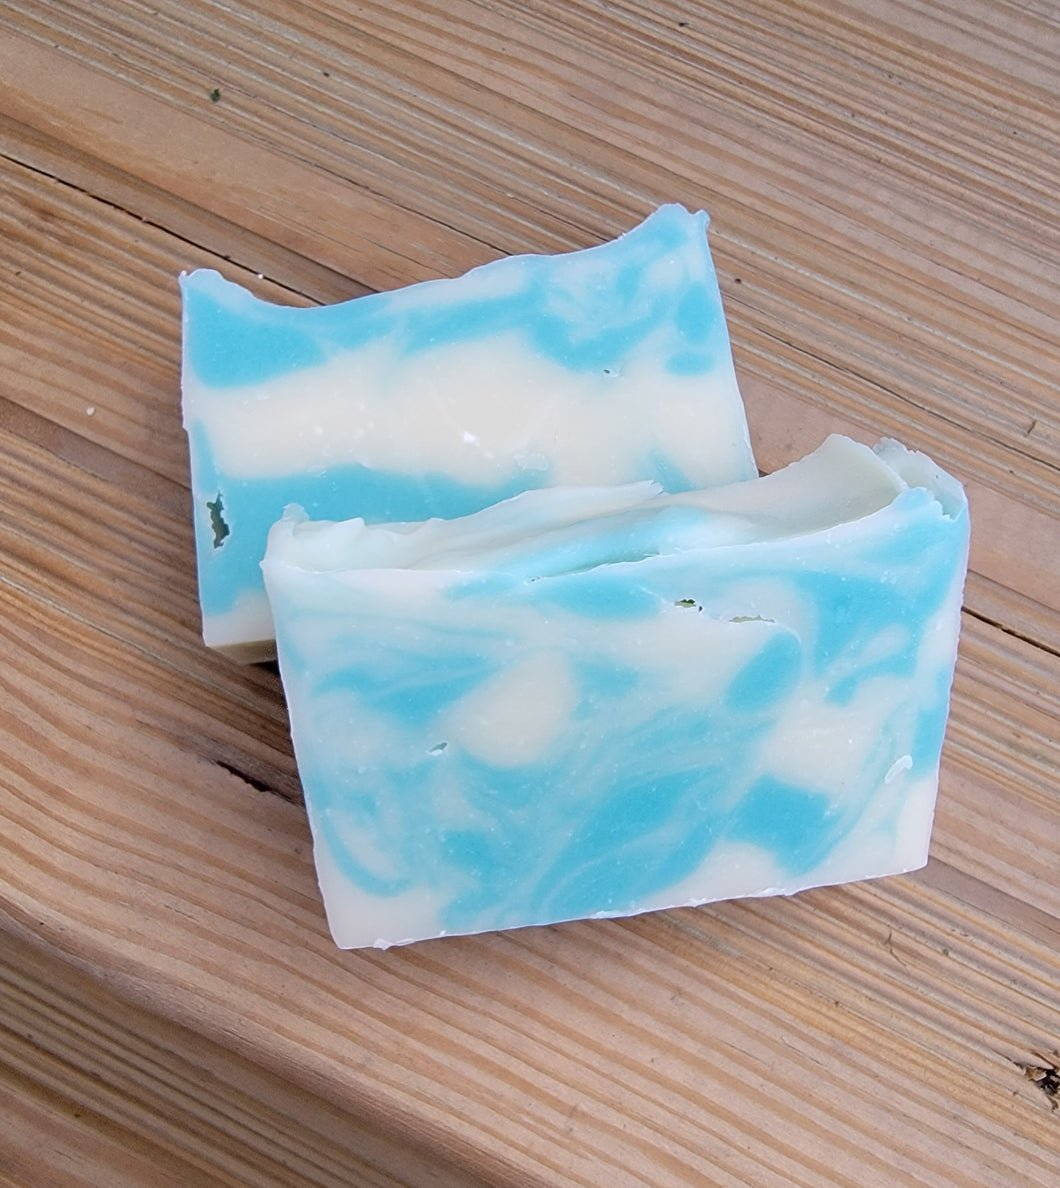 Blue and white soap with a minimum weight of 3.8 oz. 